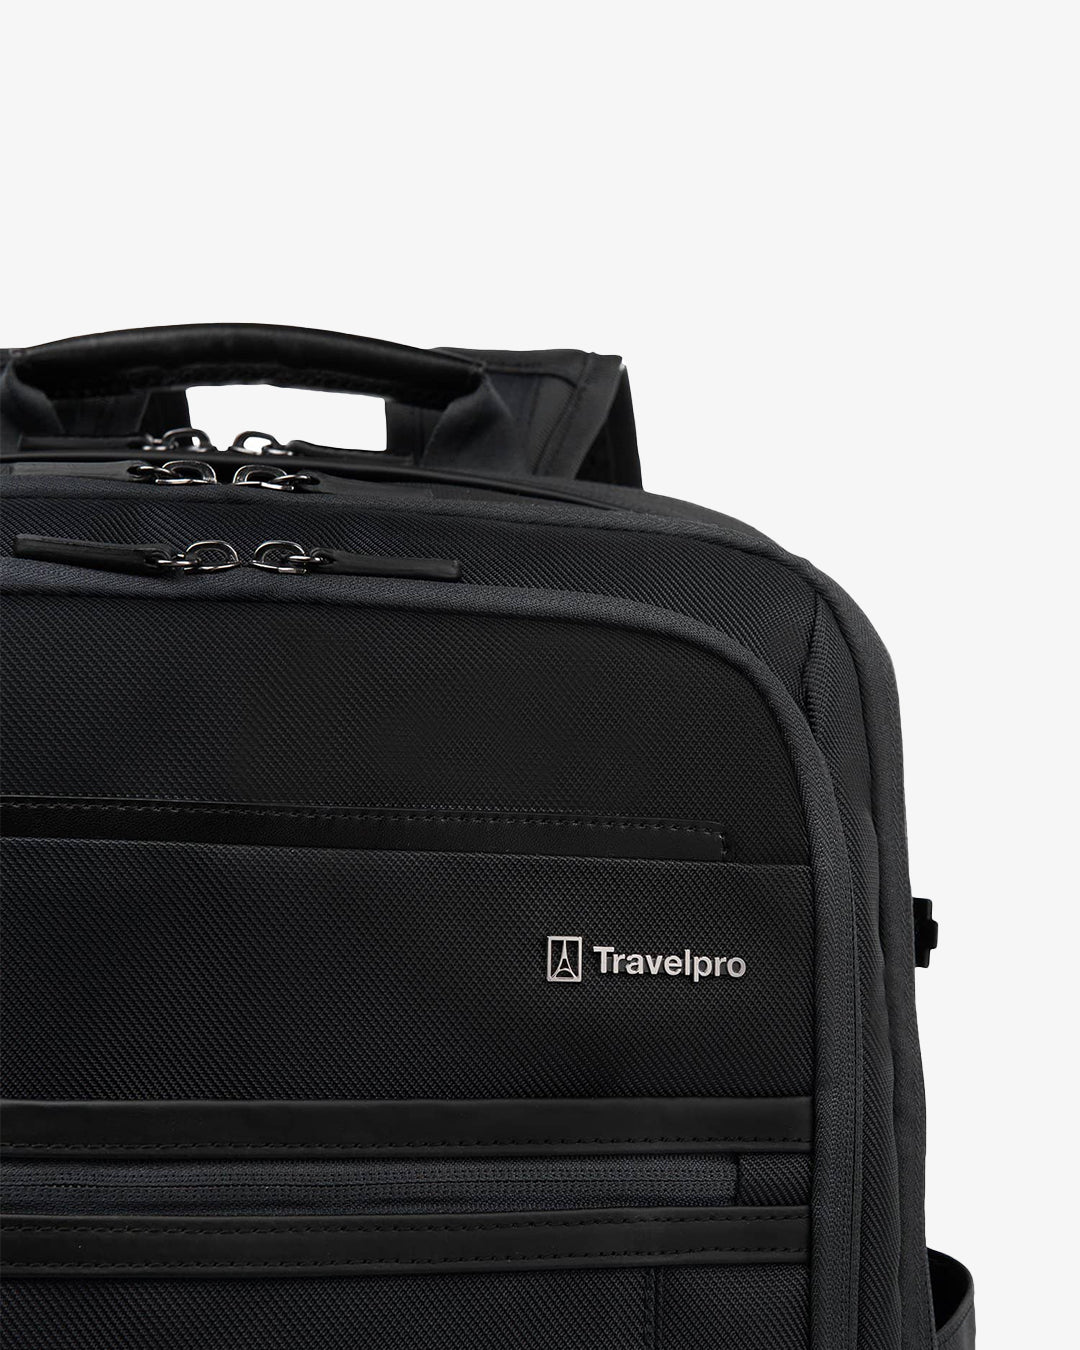 Travelpro Crew Executive Choice 3 Backpack (LARGE)